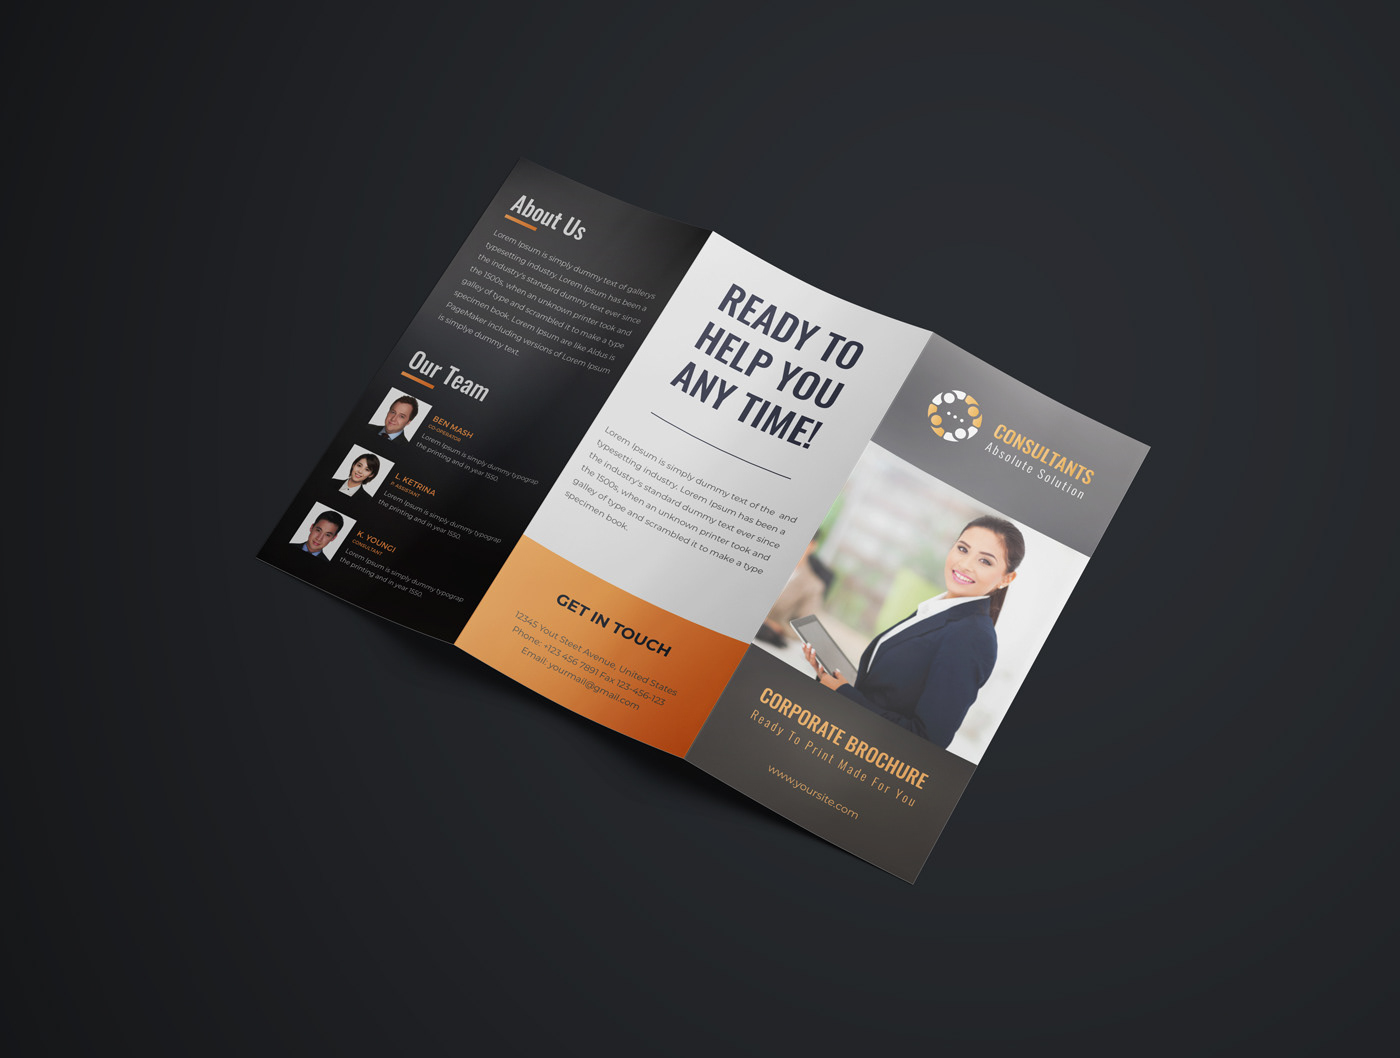 trifold brochure Trifold Brochure Design trifold brochure design corporate business agency company professional